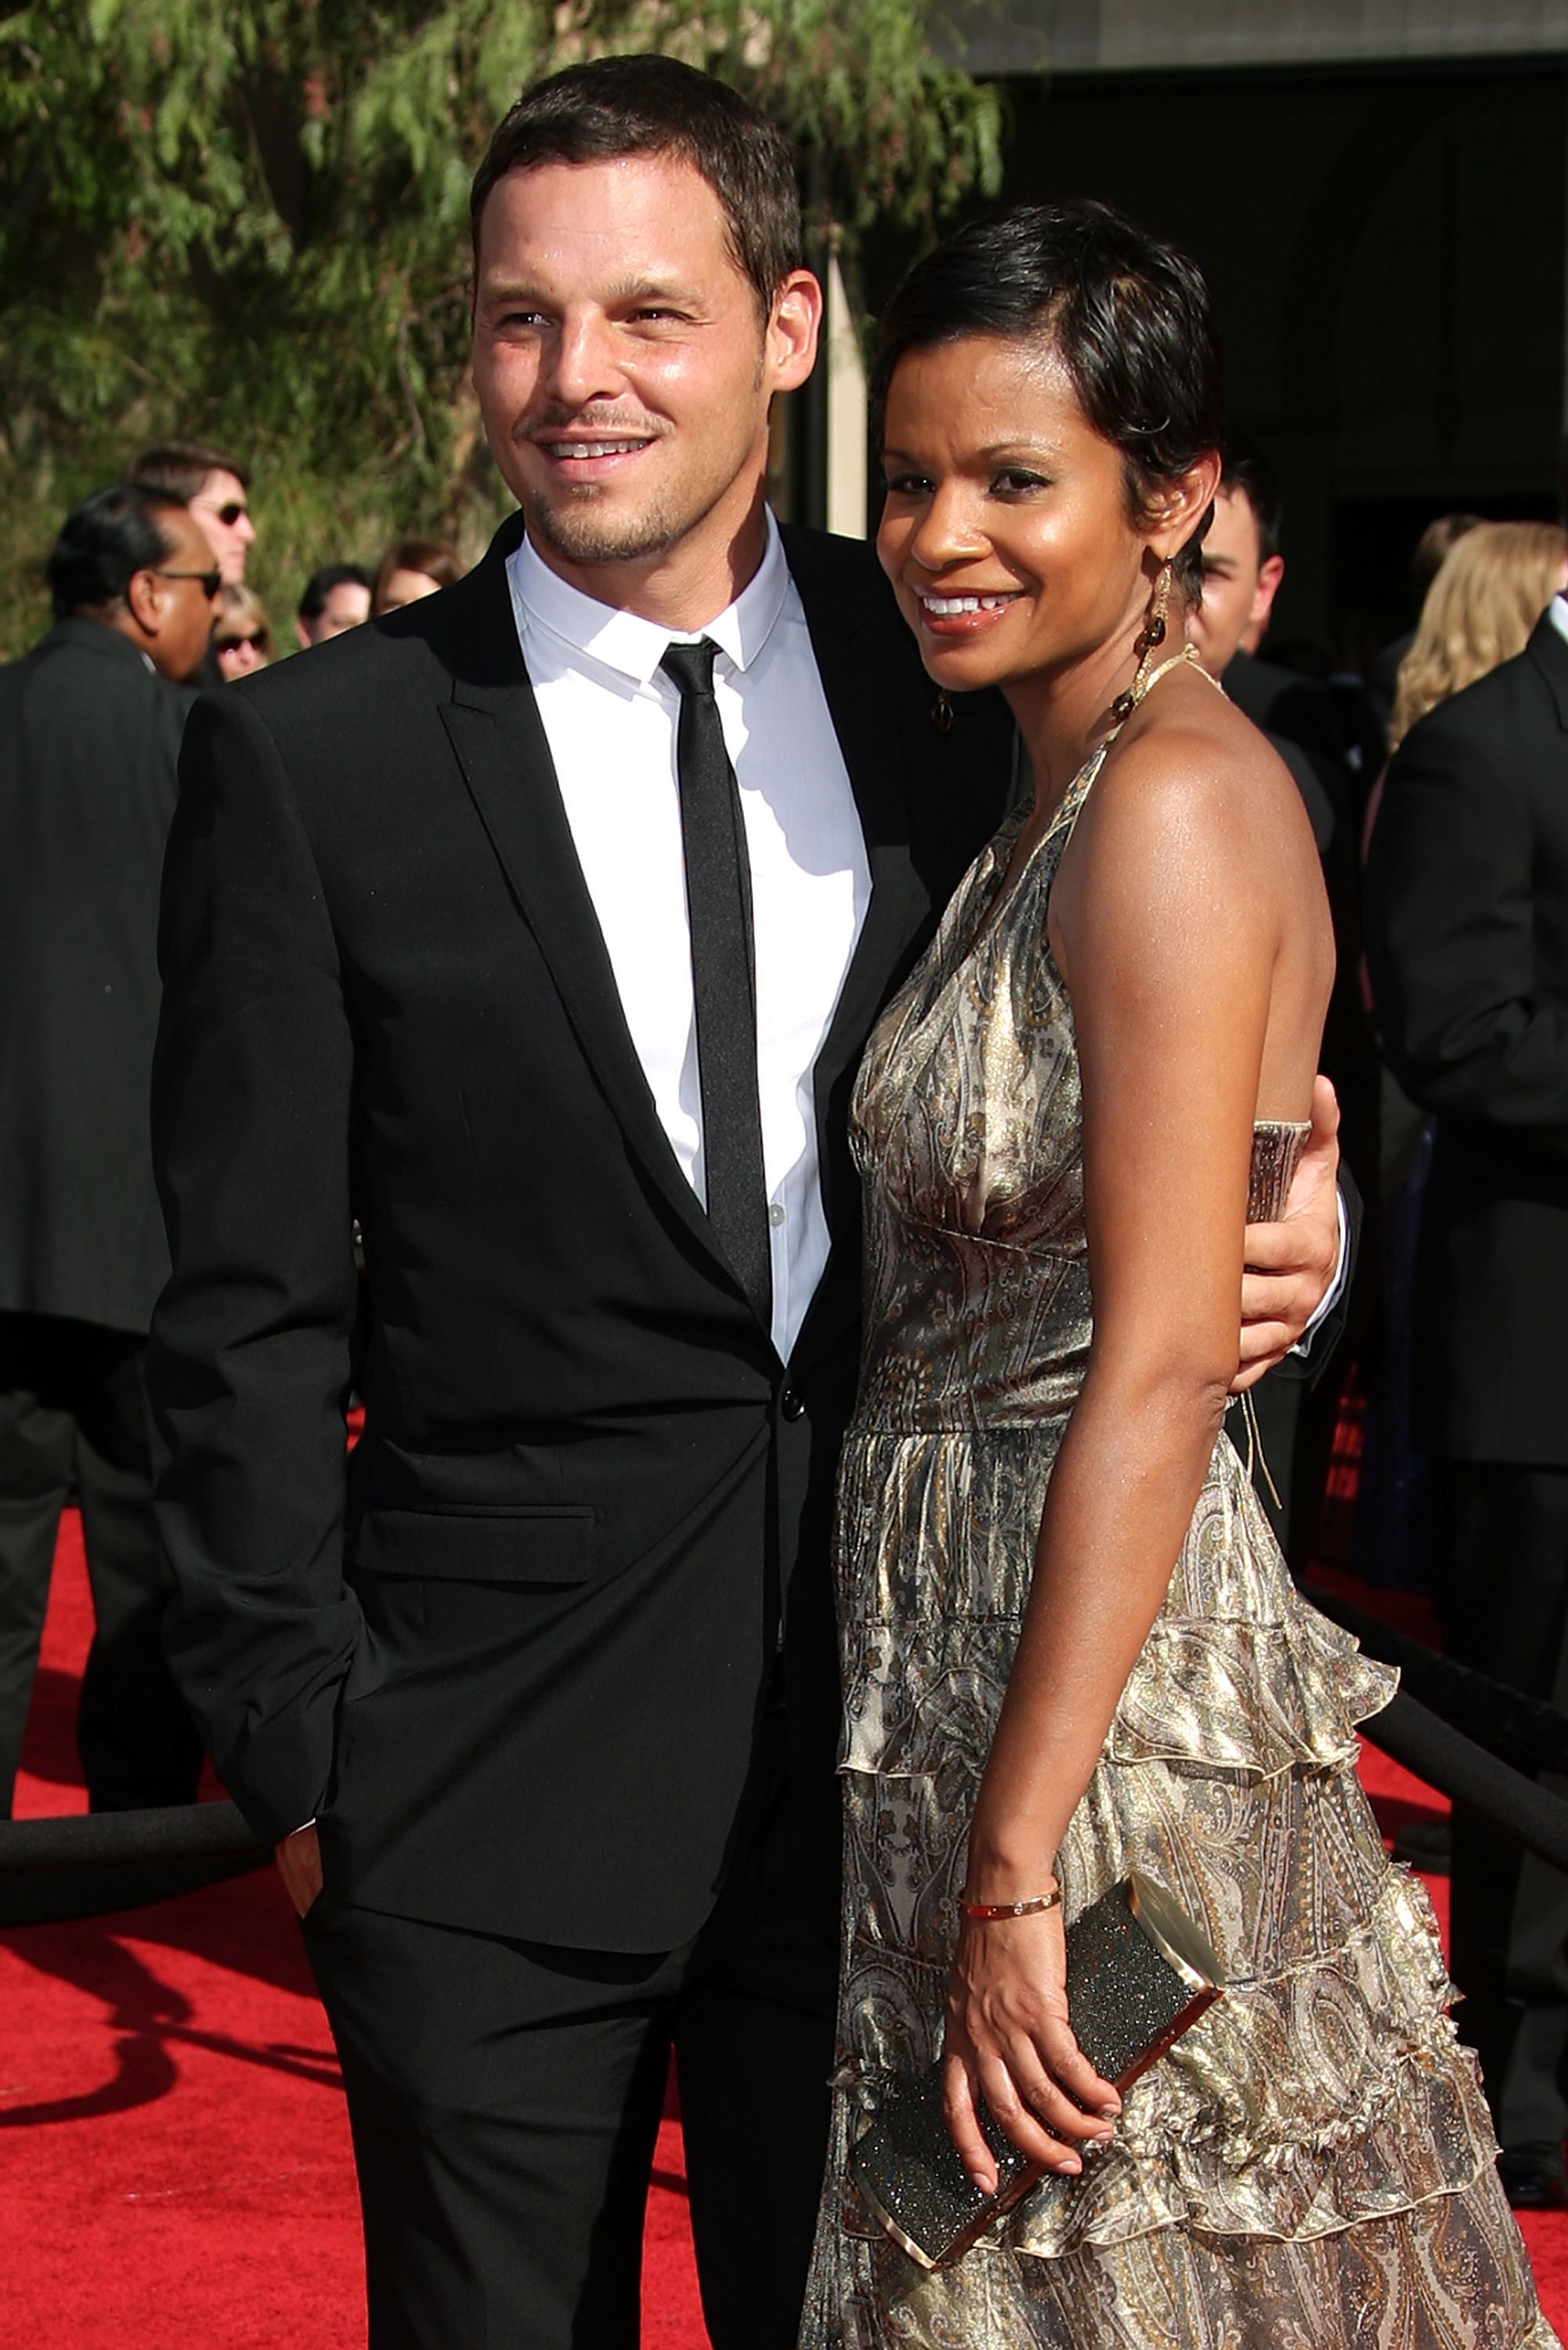 Actor Justin Chambers (L) and his wife Keisha Chambers arrive at the 59th Annual Primetime Emmy Awards at the Shrine Auditorium, on September 16, 2007, in Los Angeles, California. | Source: Getty Images